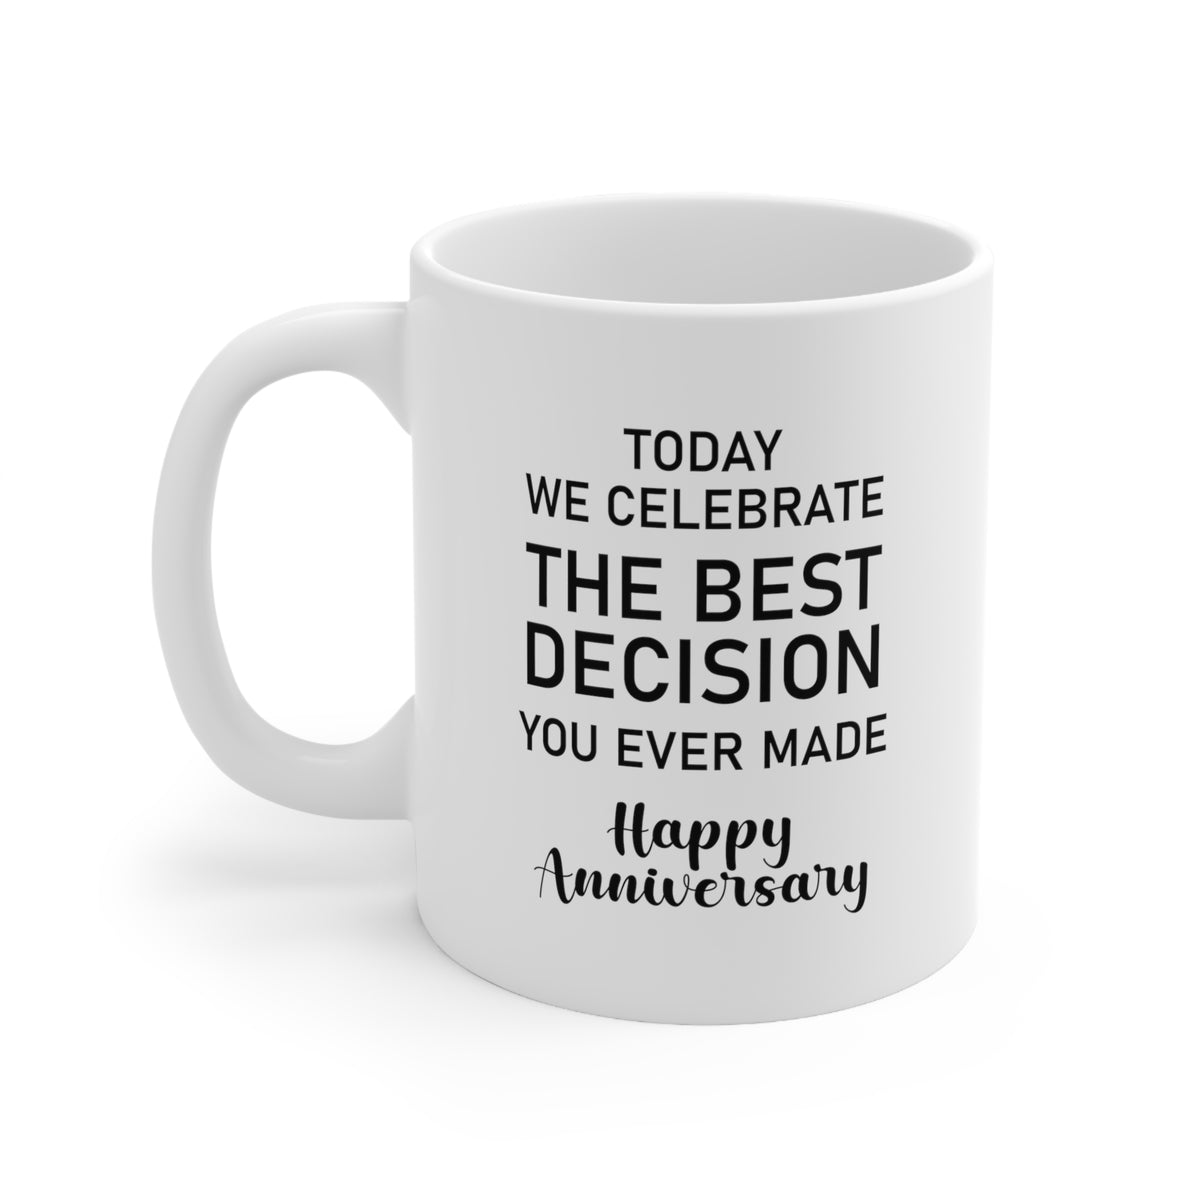 Wife Husband Coffee Mug, Today We Celebrate The Best Decision You Ever Made, Wedding Anniversary Birthday Love For Men Women